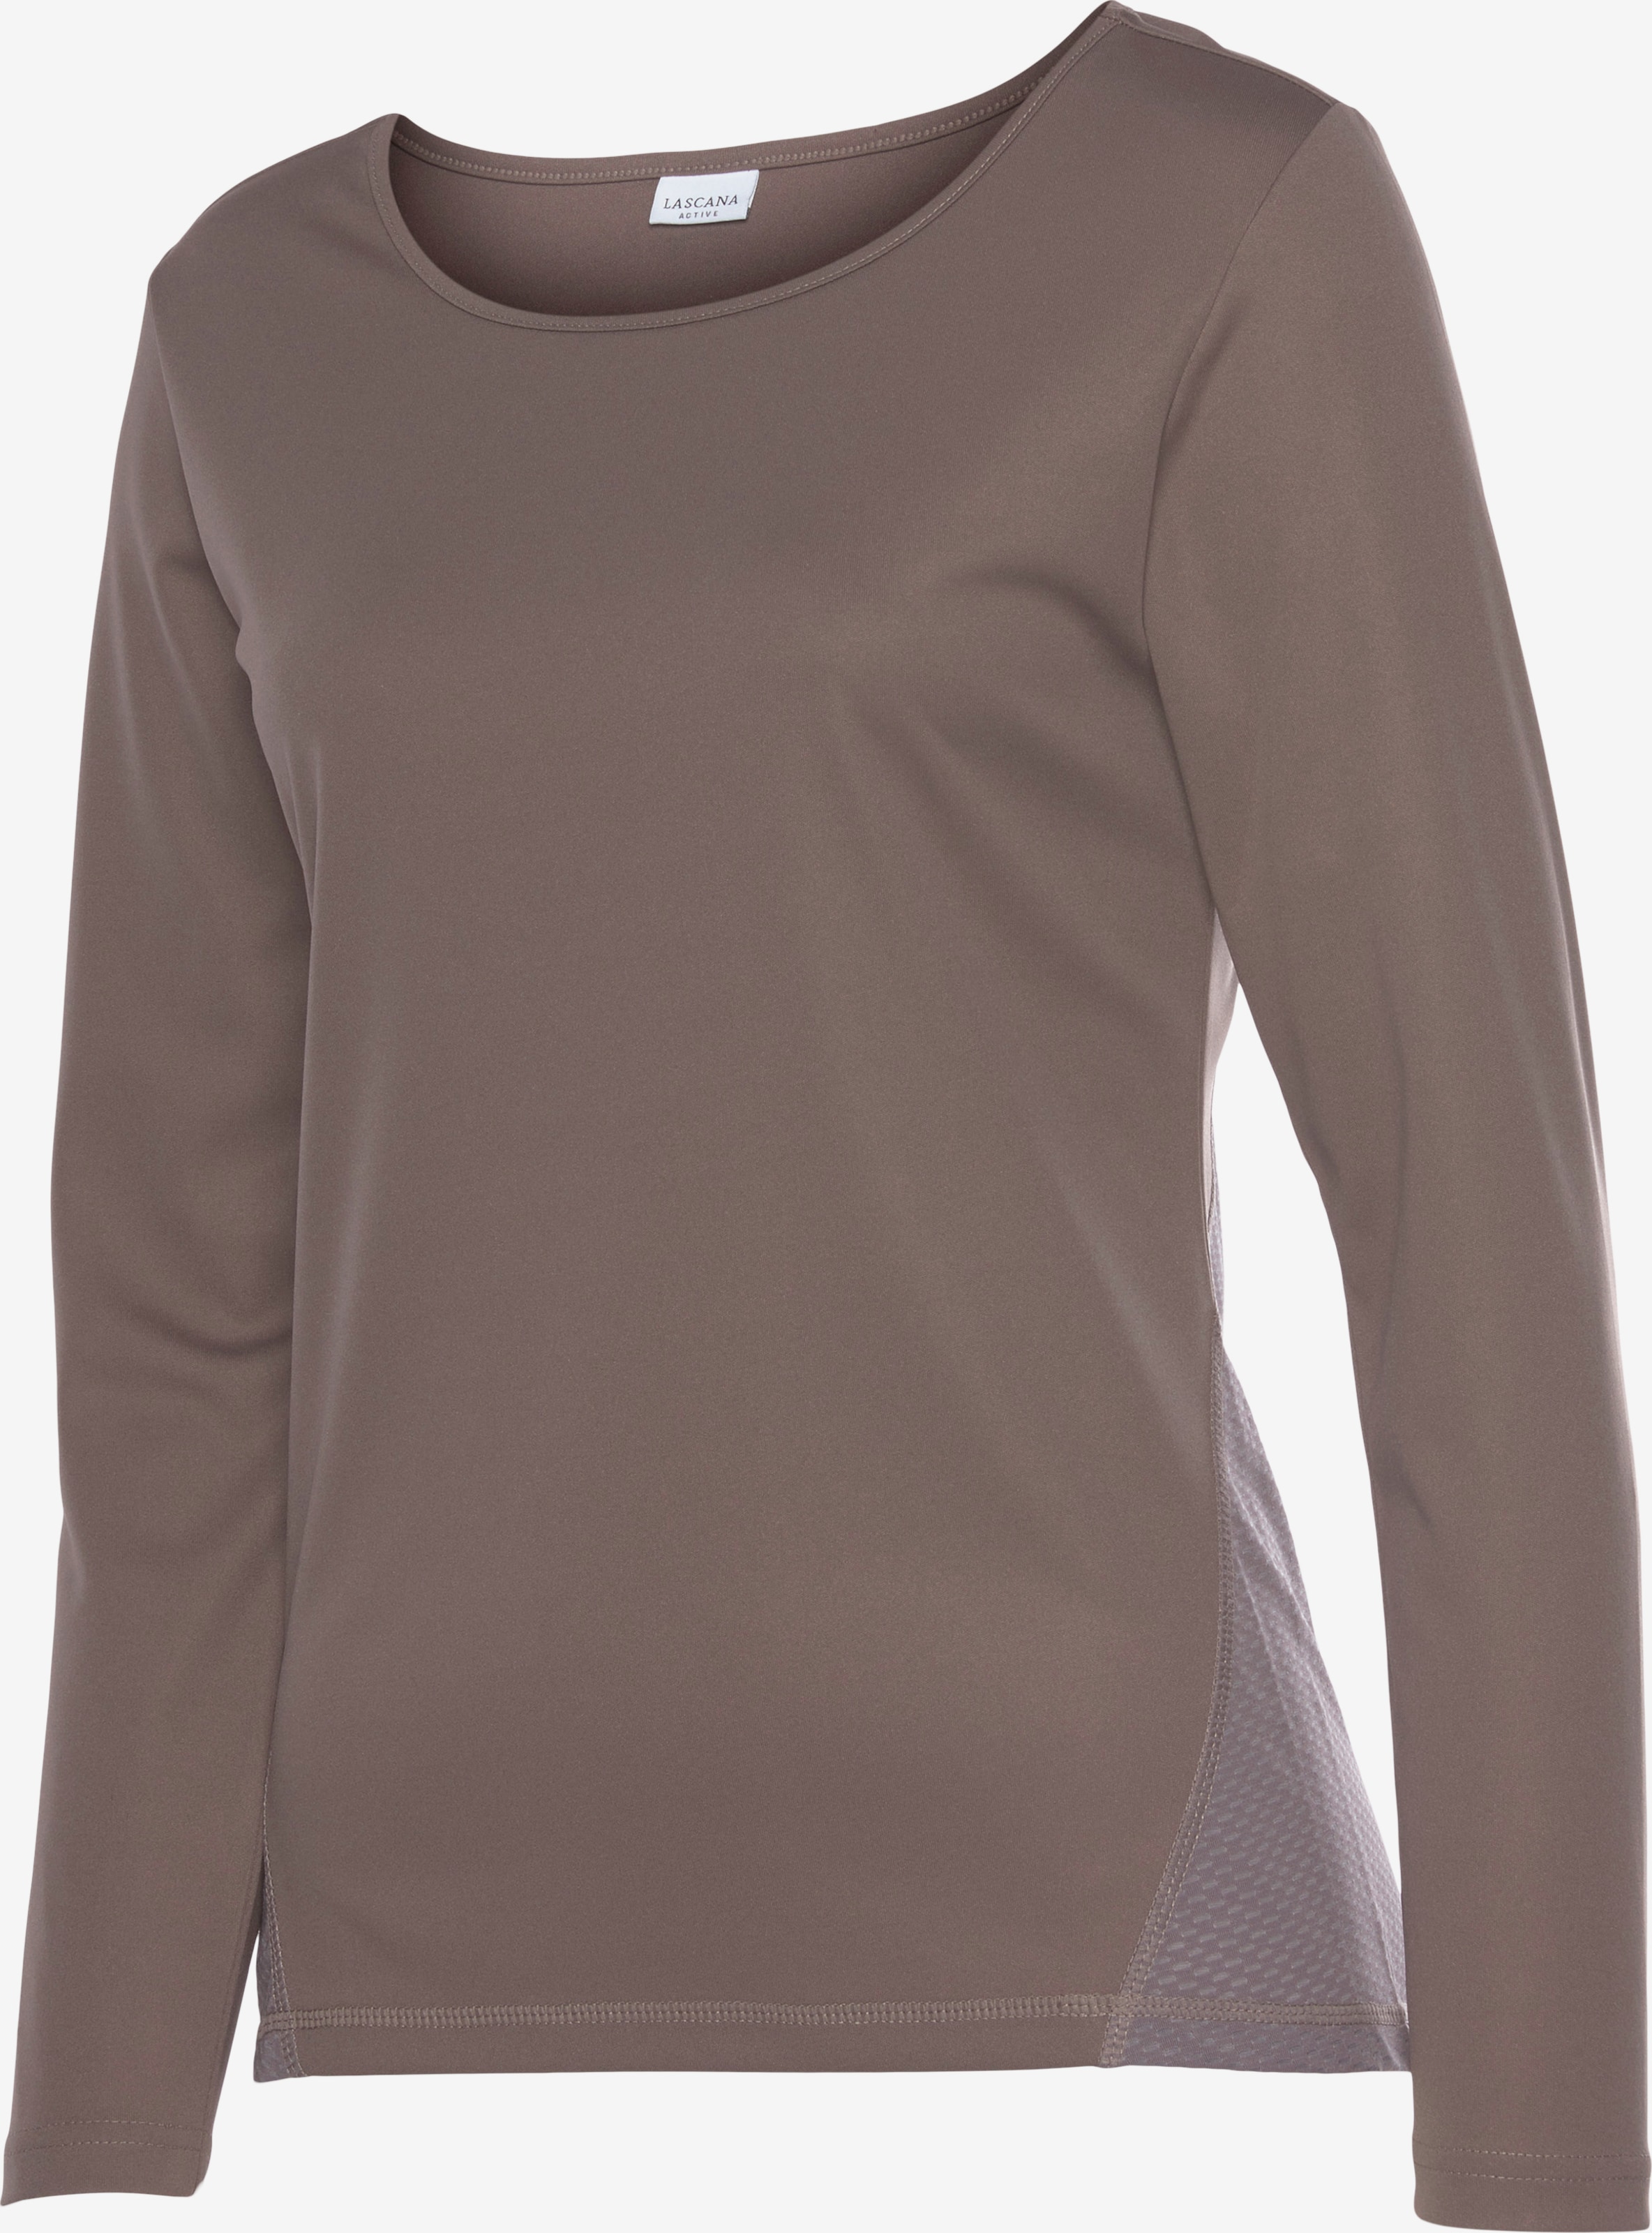 ABOUT in | Braun ACTIVE LASCANA Funktionsshirt YOU